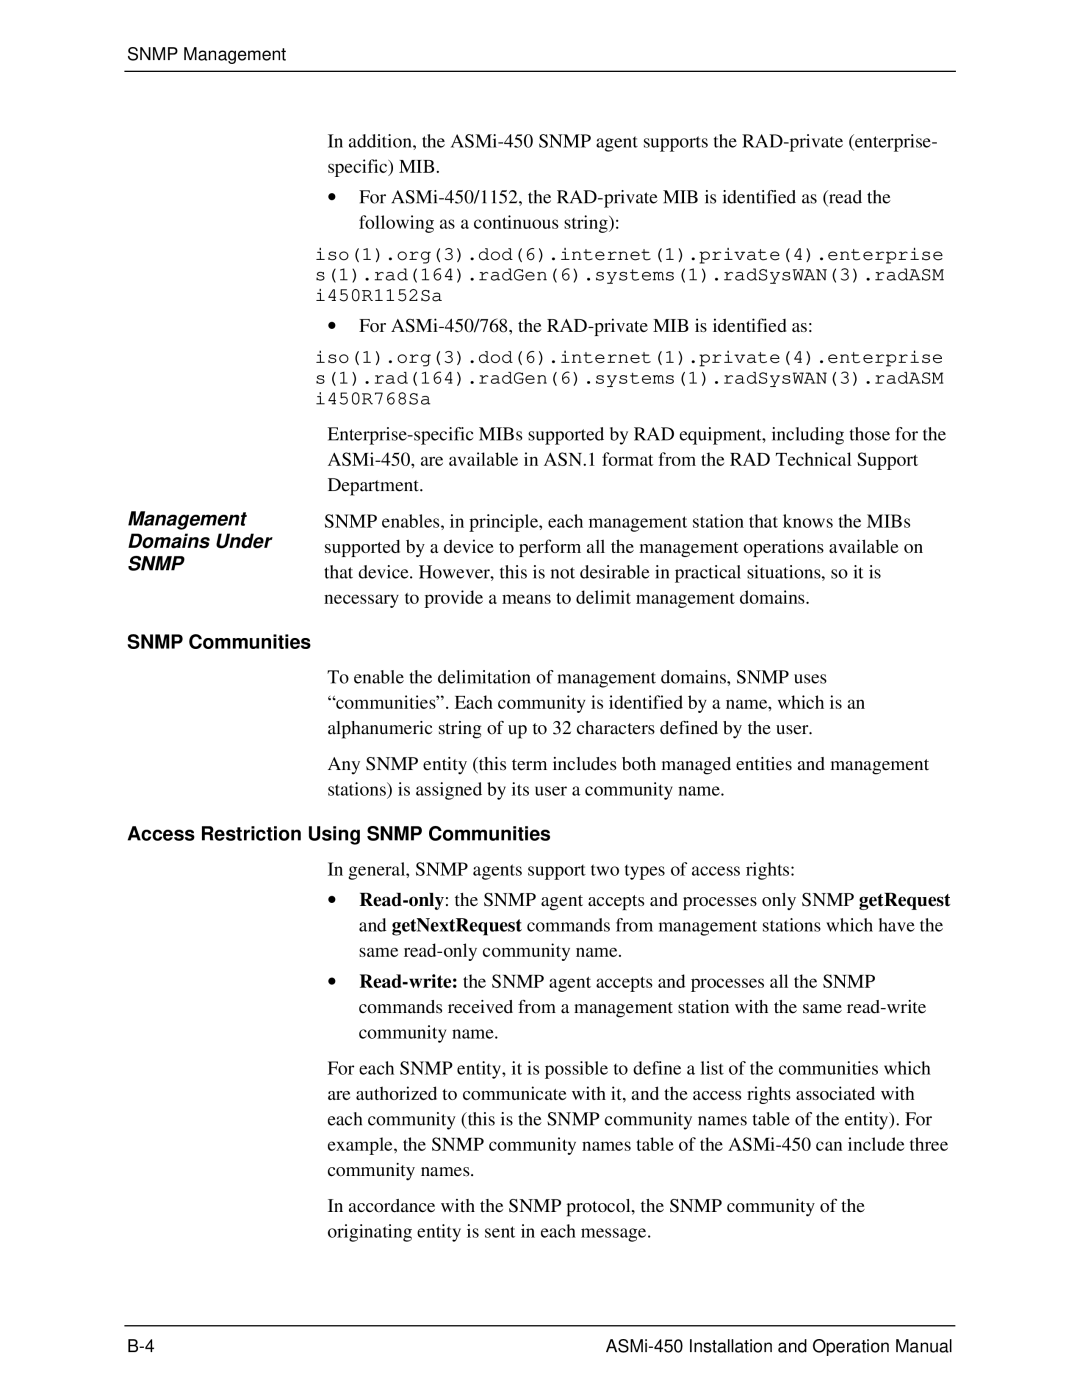 RAD Data comm ASMI-450 operation manual Management Domains Under SNMP, Access Restriction Using SNMP Communities 